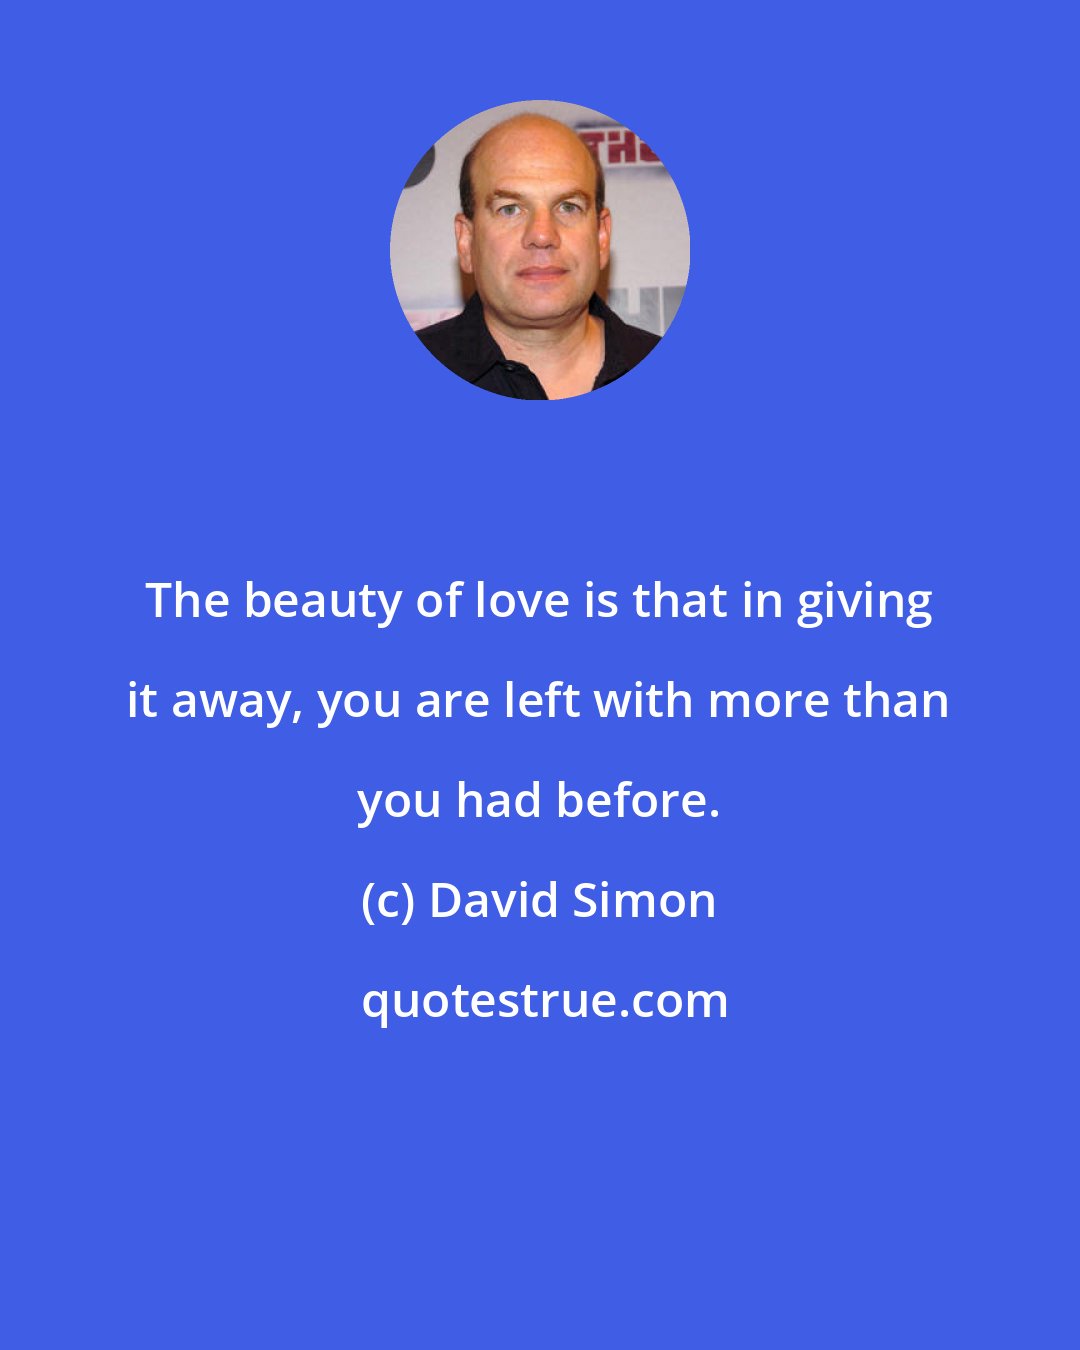 David Simon: The beauty of love is that in giving it away, you are left with more than you had before.